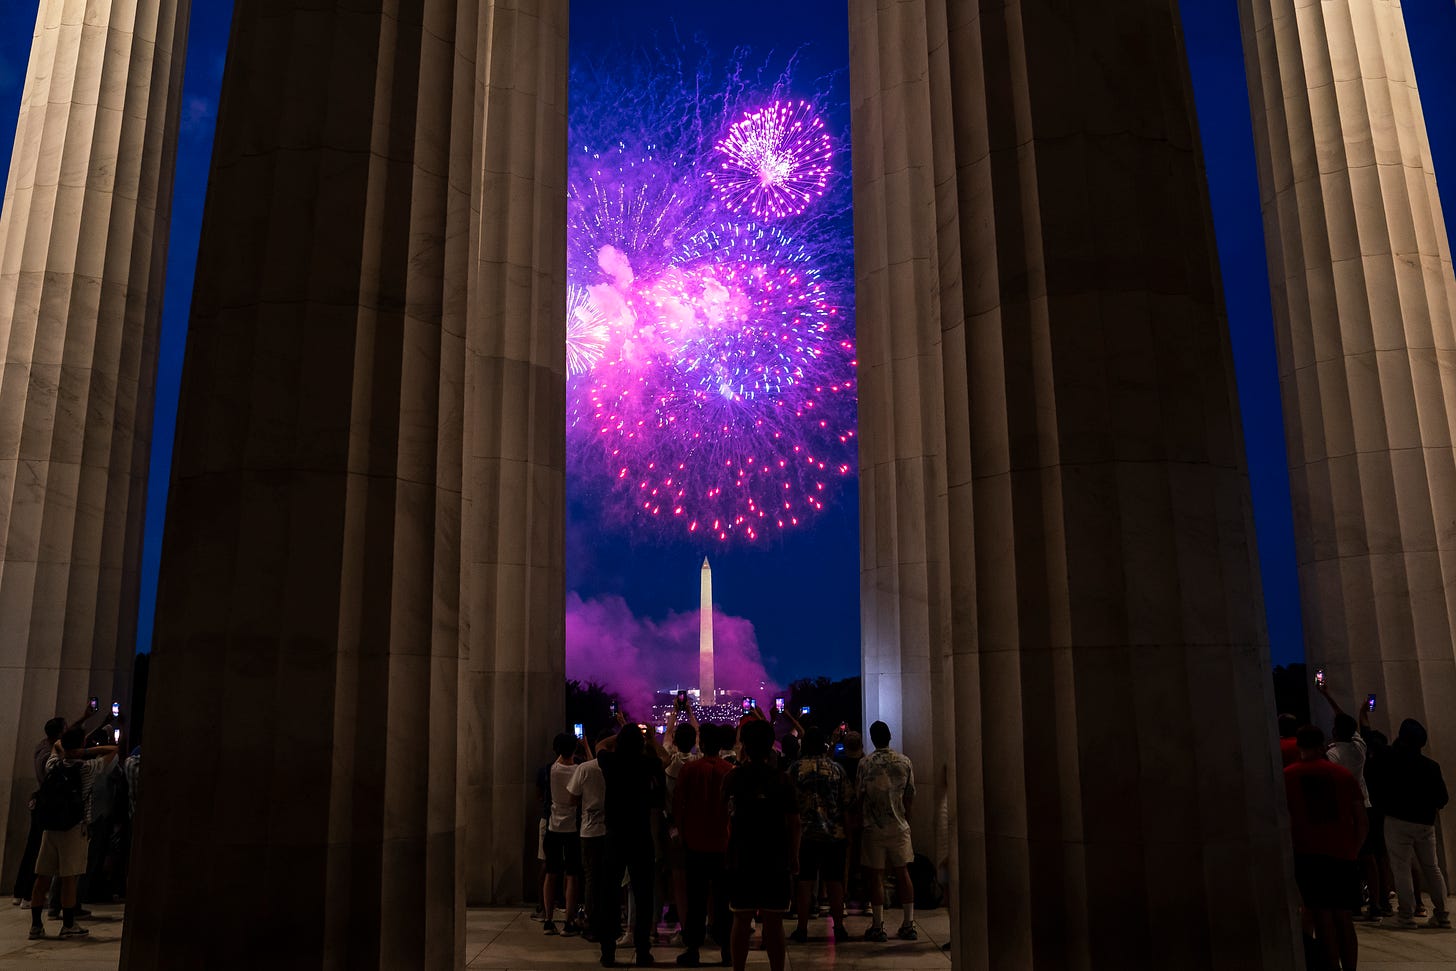 Spectators watch as fireworks erupt over the Washington Monument on July 4, 2022 in Washington, DC. (Photo by Nathan Howard/Getty Images)